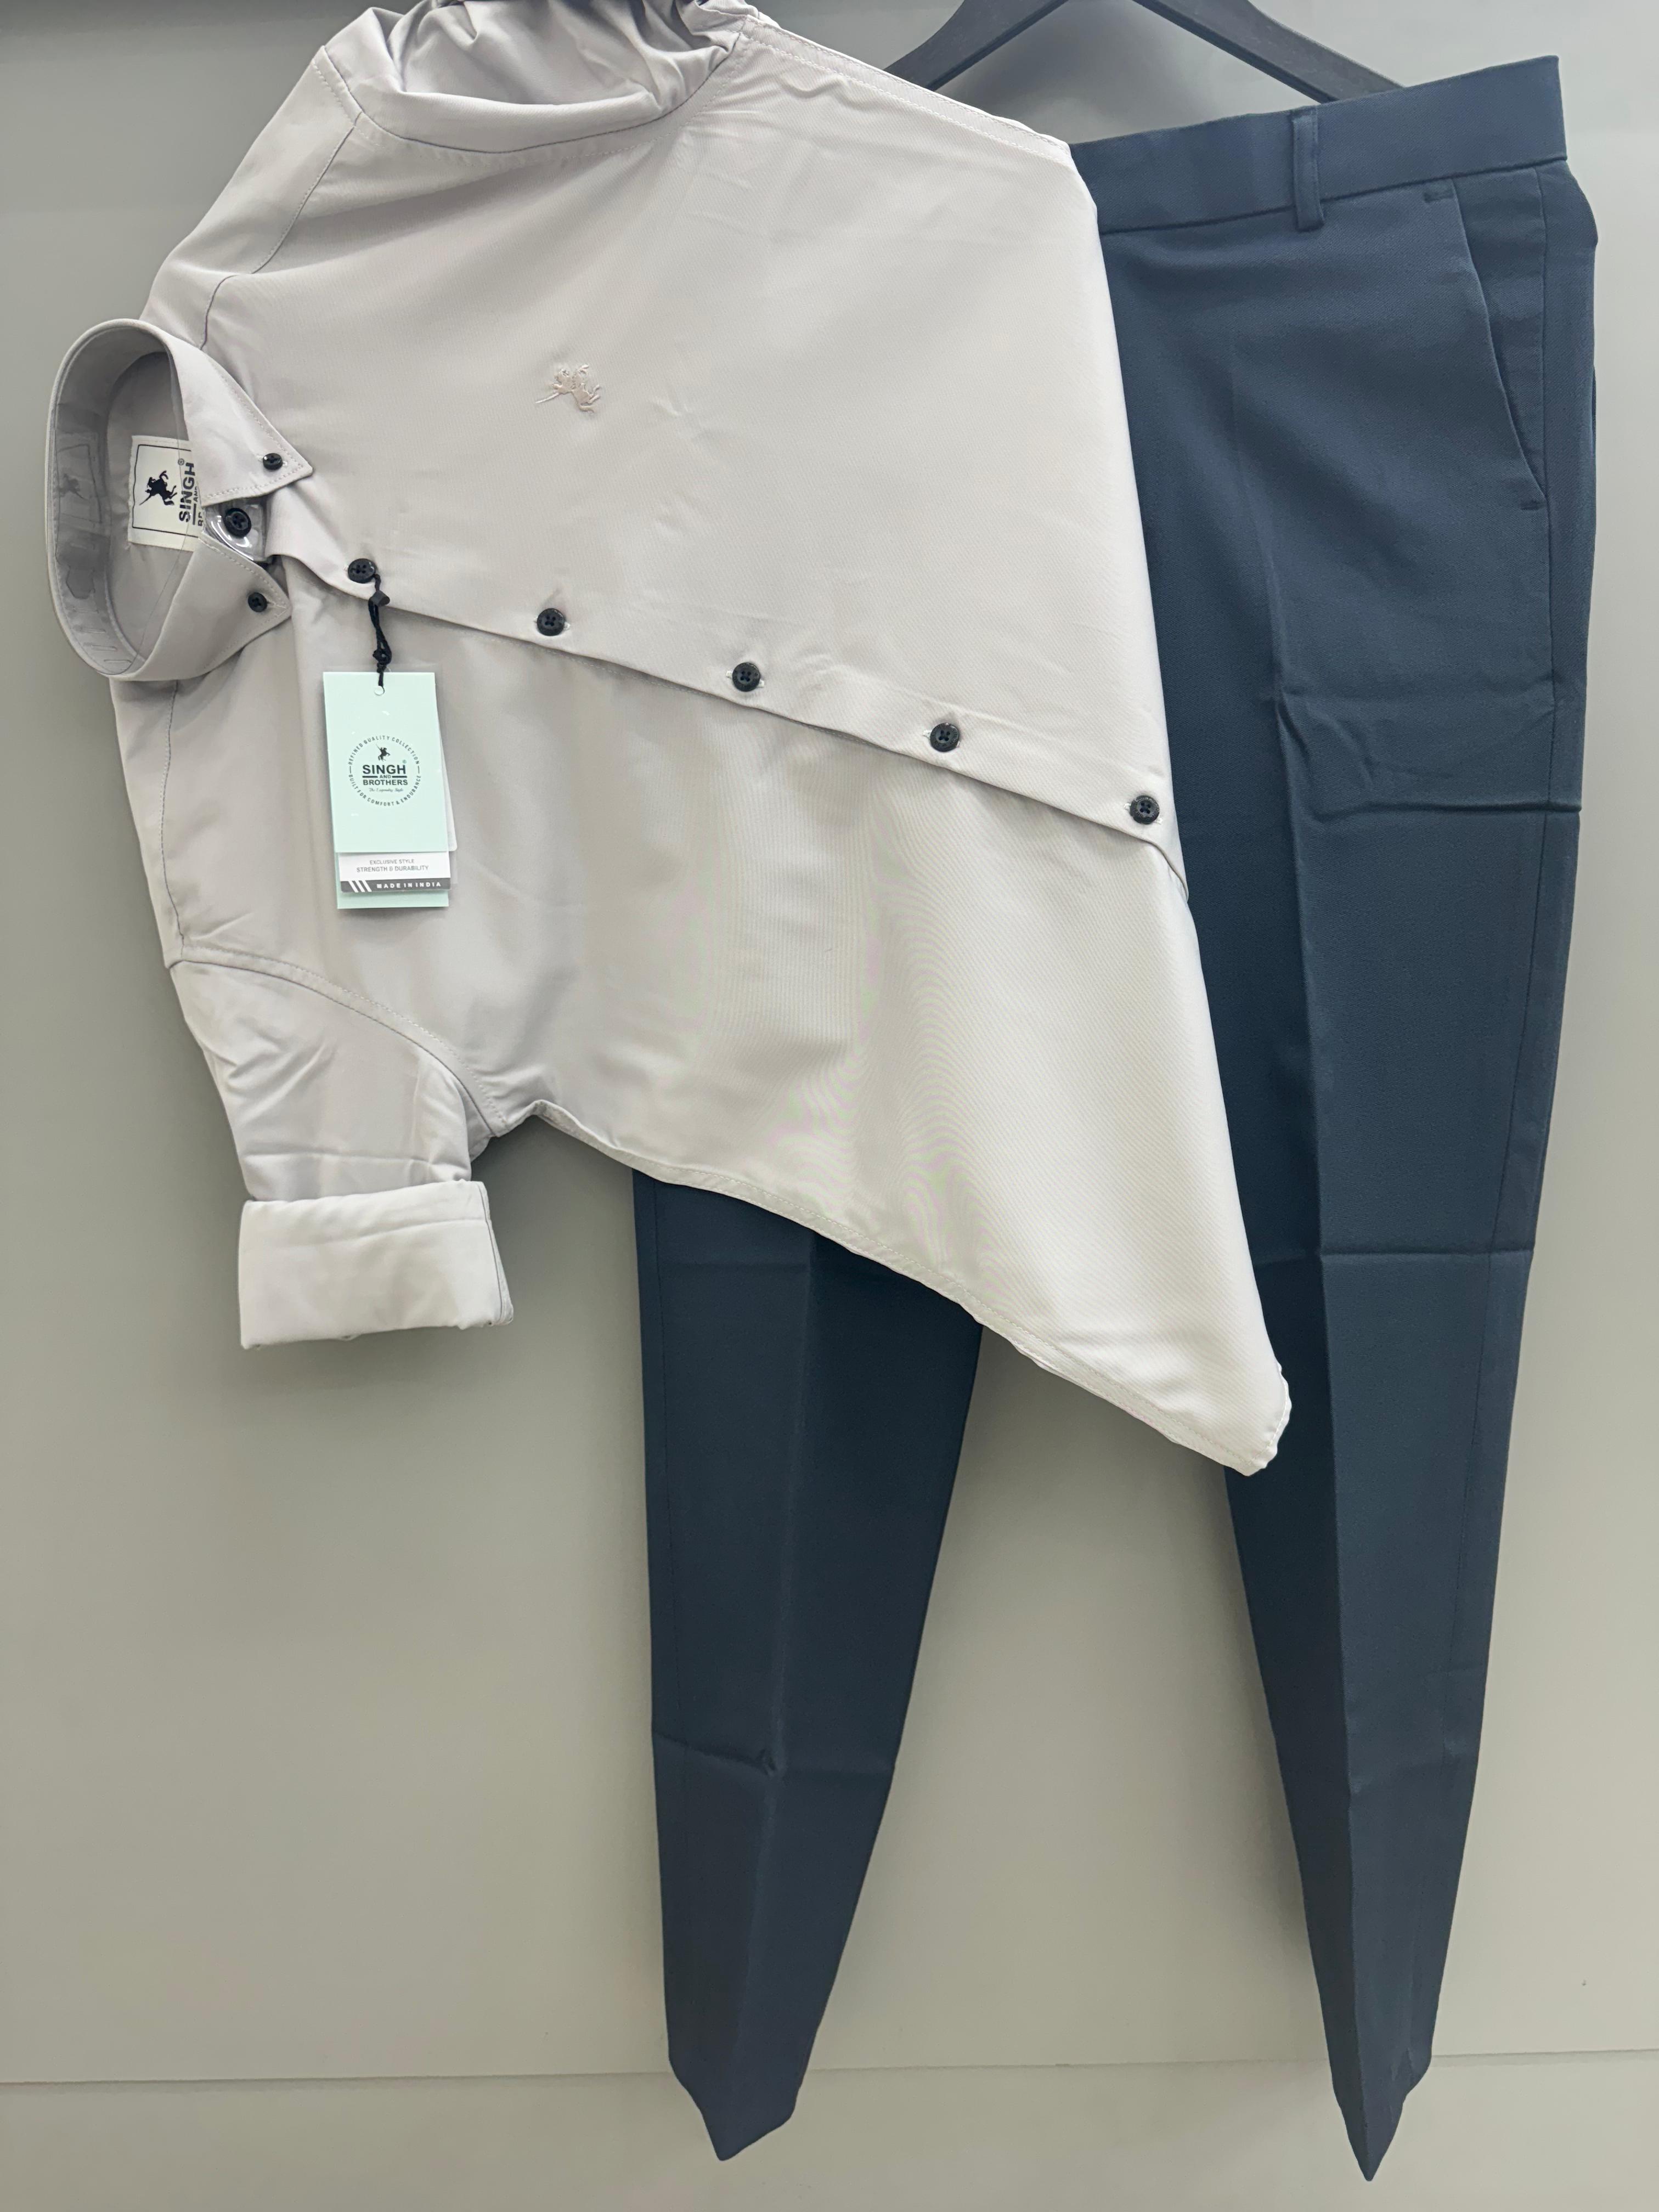 Top Chinos And Shirt Combinations For Boys In 2023 - Hiscraves